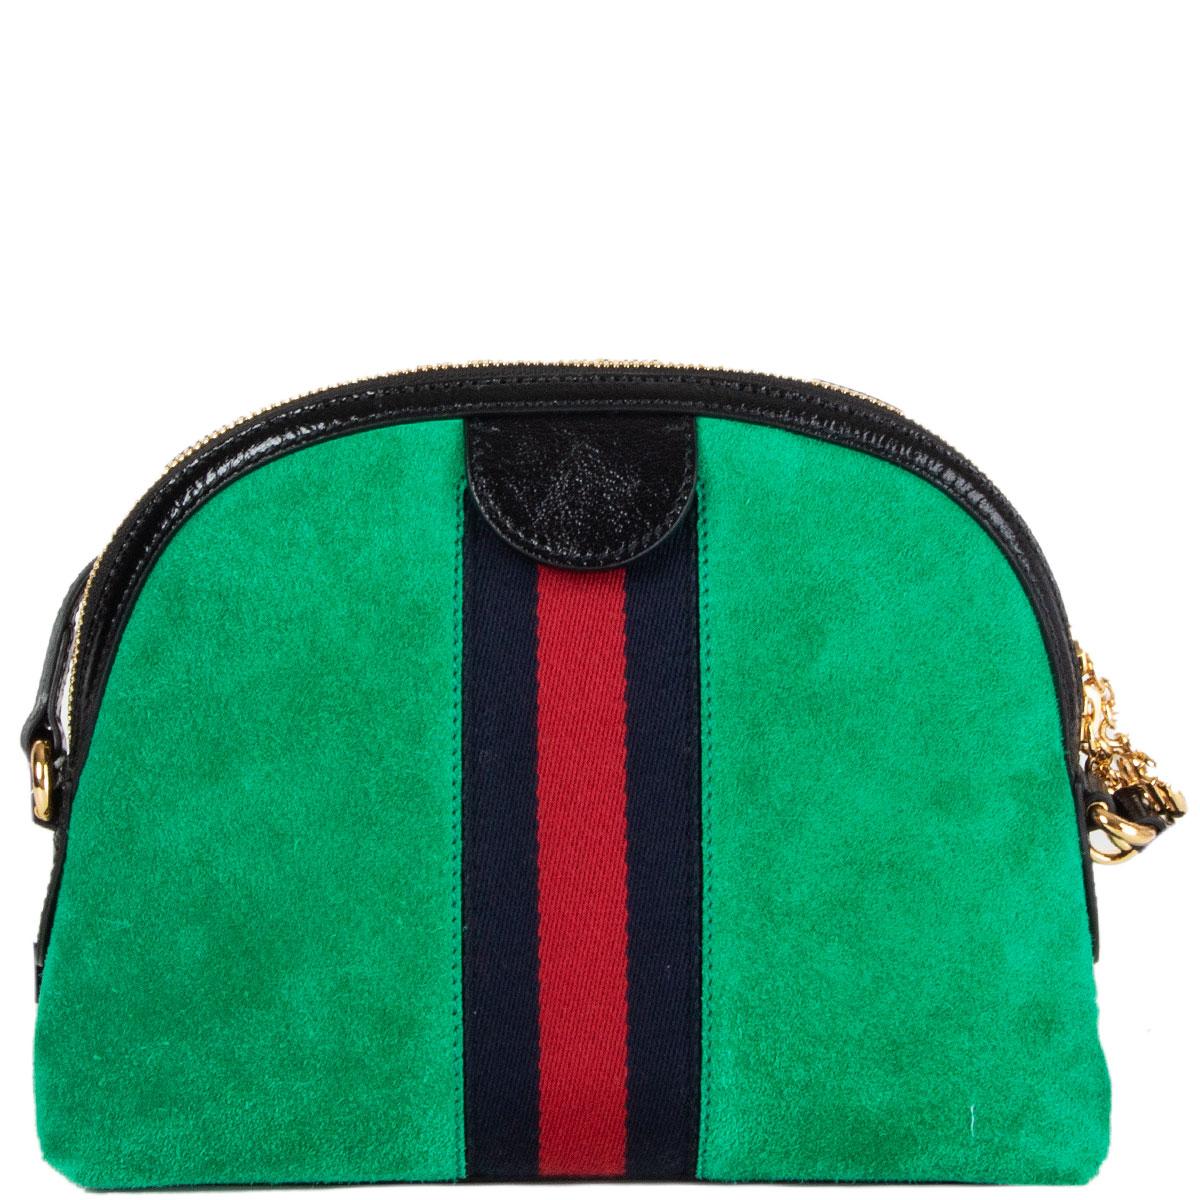 Green GUCCI green suede OPHIDIA SMALL Shoulder Bag